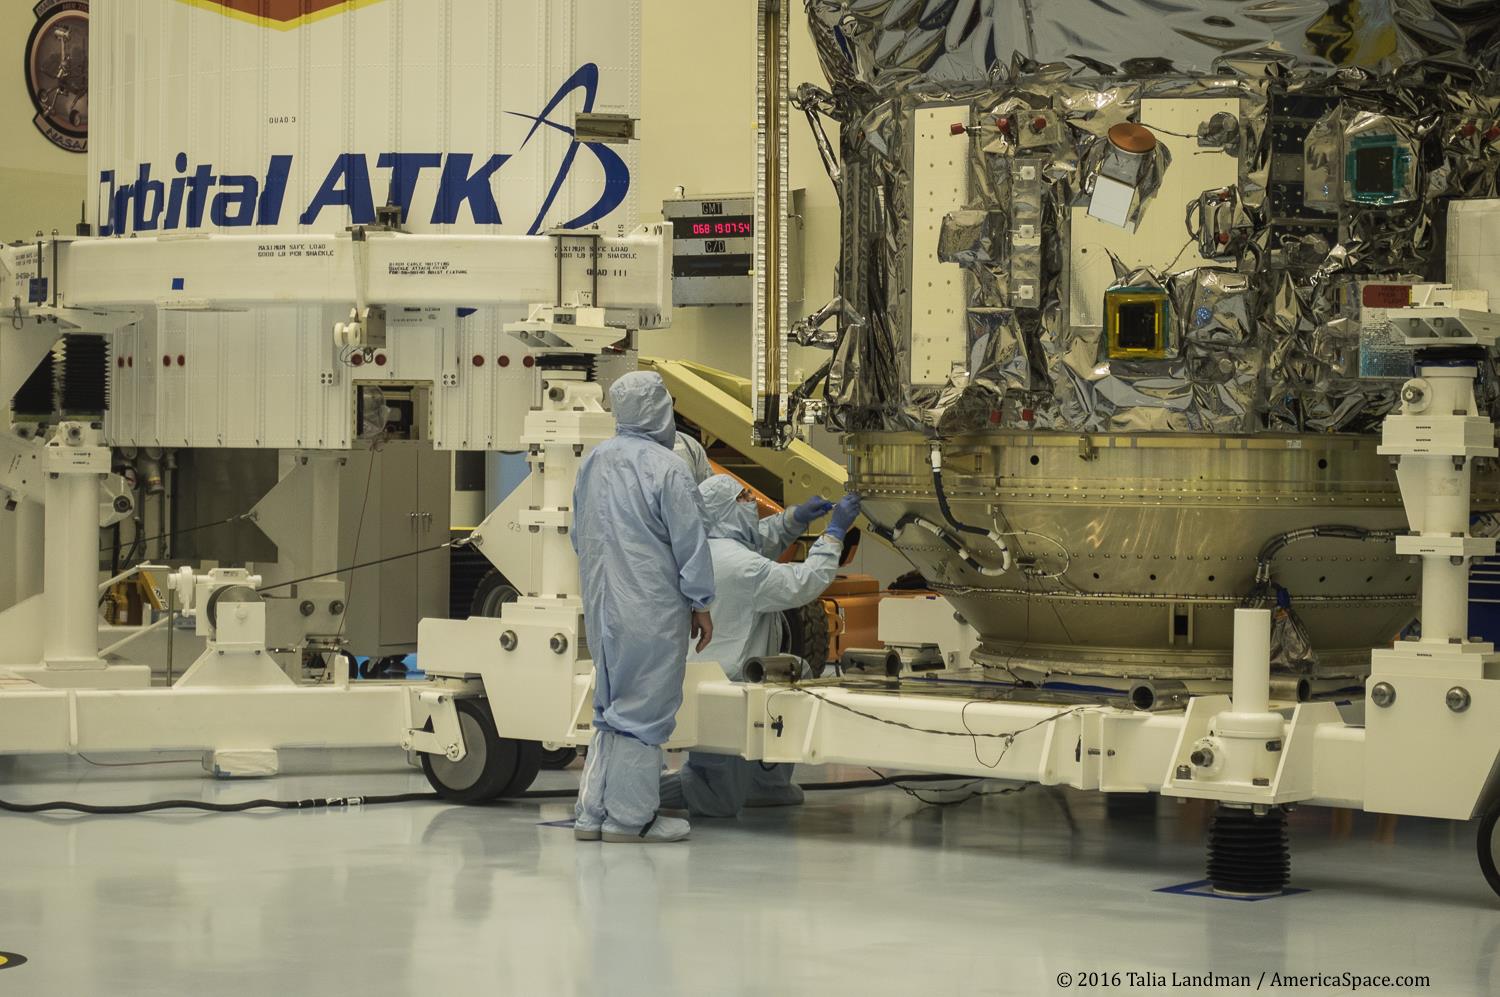 Orbital ATK's OA-6 Cygnus spacecraft is readied for its 22 March launch to the International Space Station (ISS). Photo Credit: Talia Landman / AmericaSpace